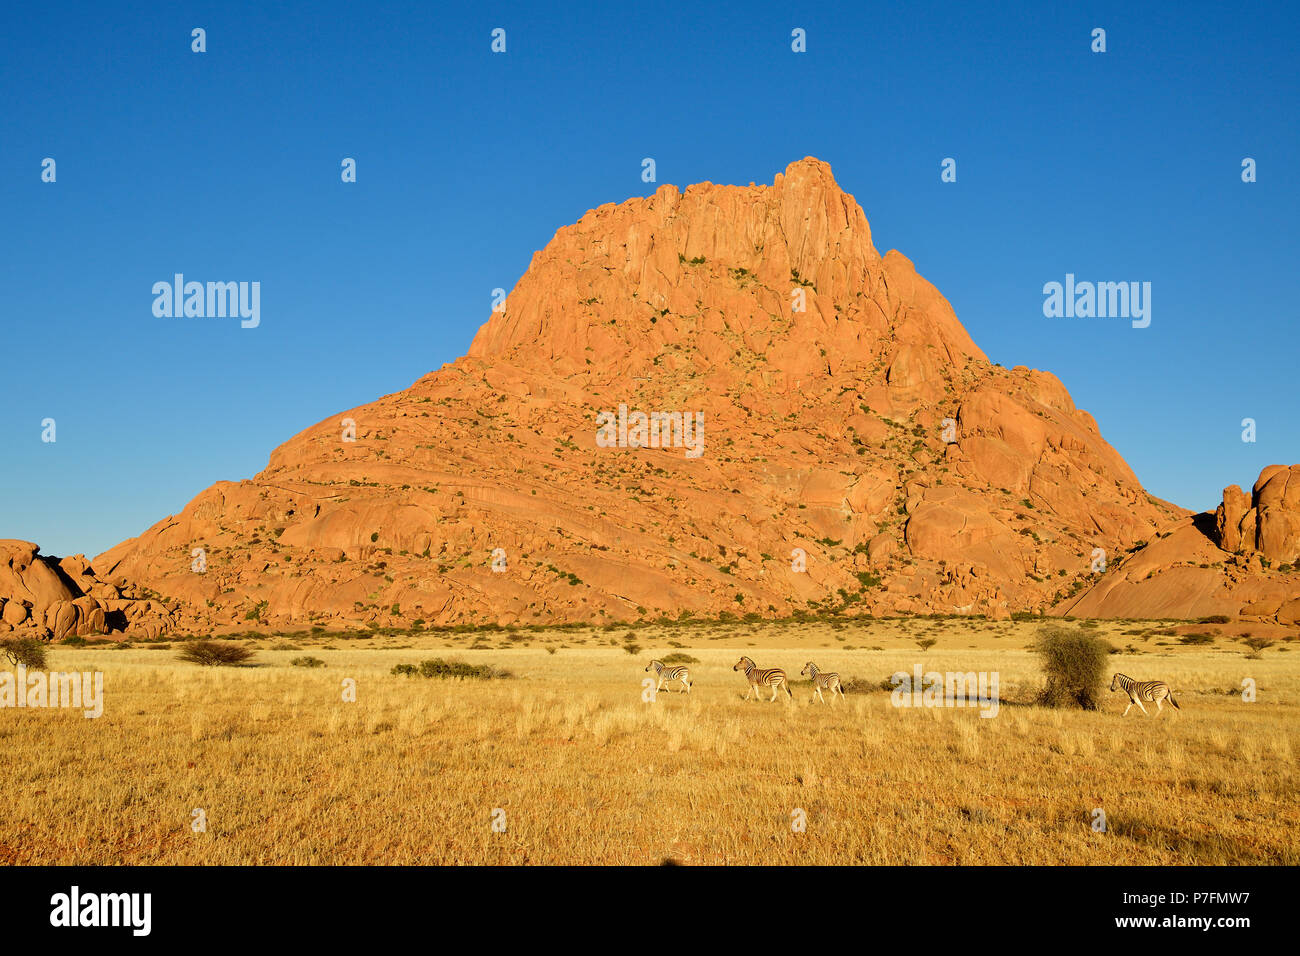 Spitzkoppe in the morning with zebras grazing in front of the mountain, Erongo region, Damaraland, Namibia Stock Photo